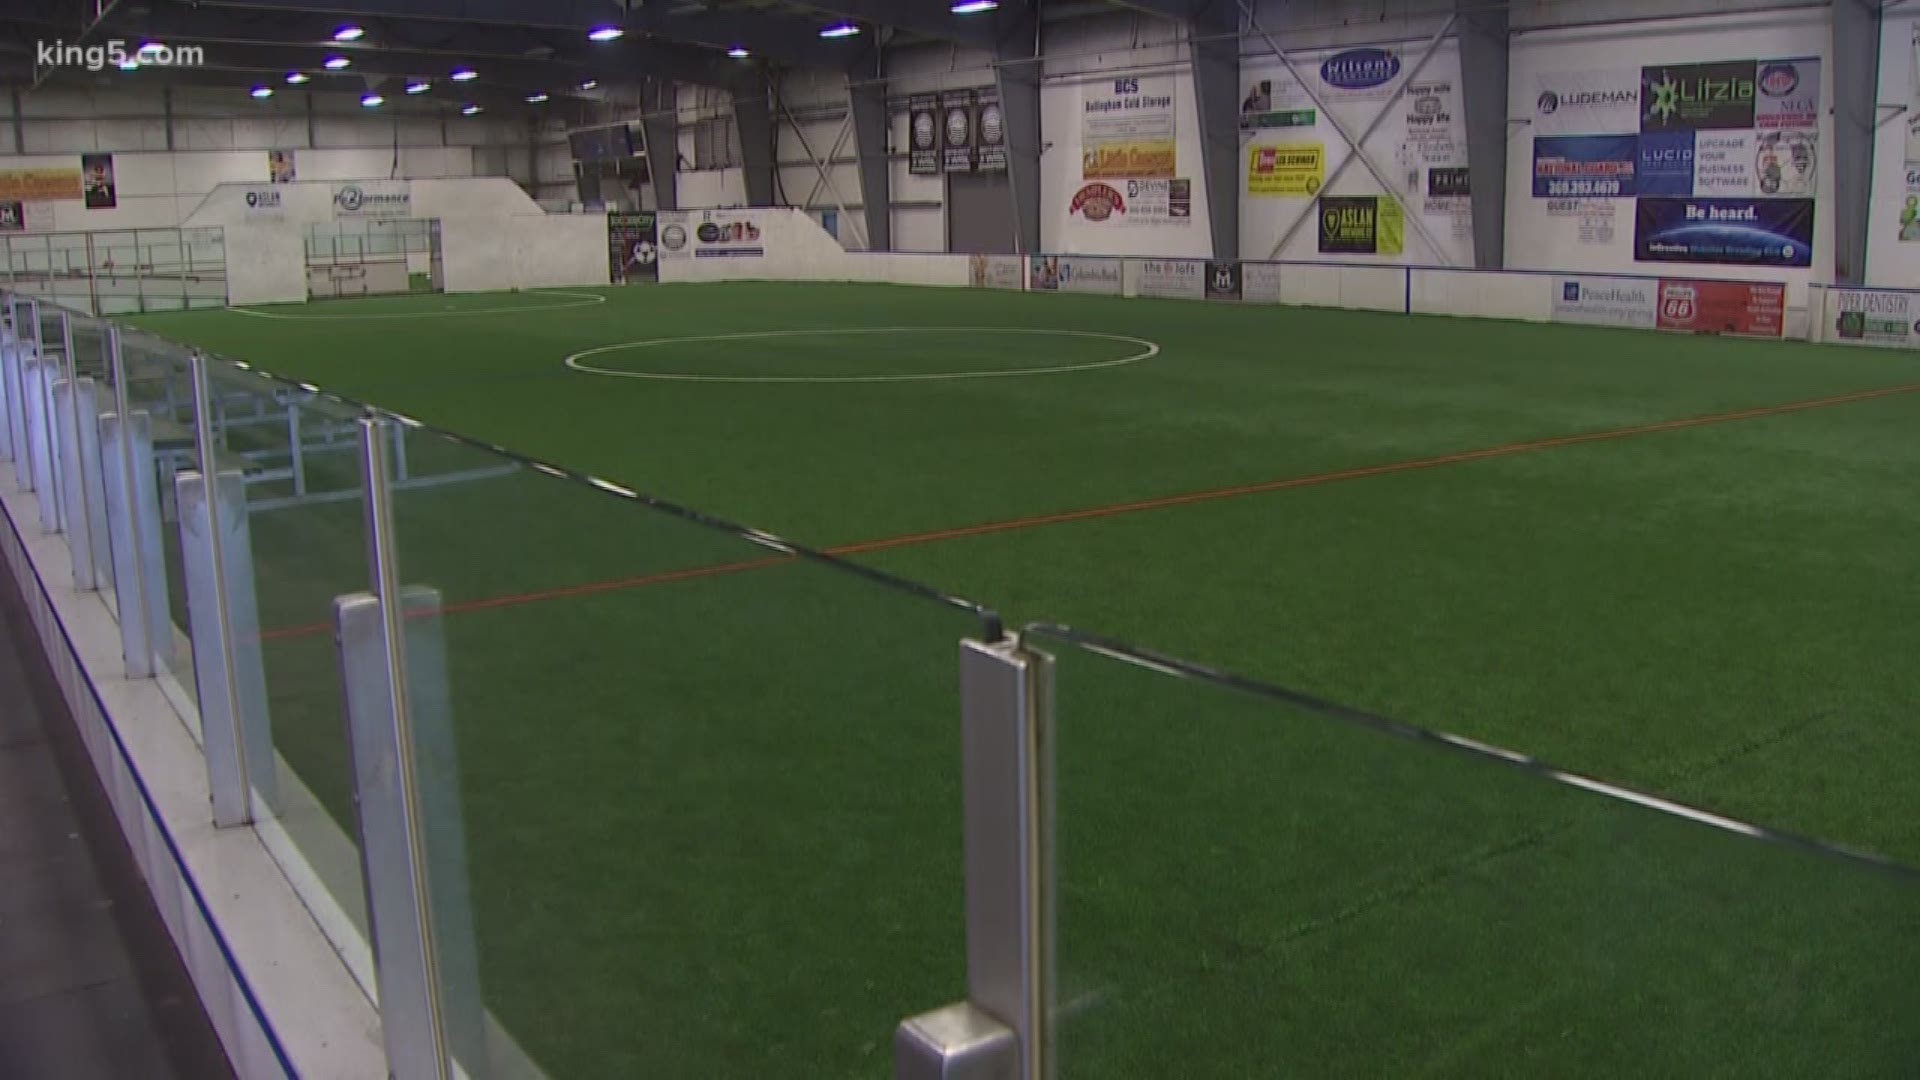 It has been a staple in the Bellingham community for decades, but it has fallen into disrepair and needs help. The city's "Sportsplex" serves thousands of kids. Today, it's hoping to make a deal to help seal its future. KING 5's Eric Wilkinson reports.